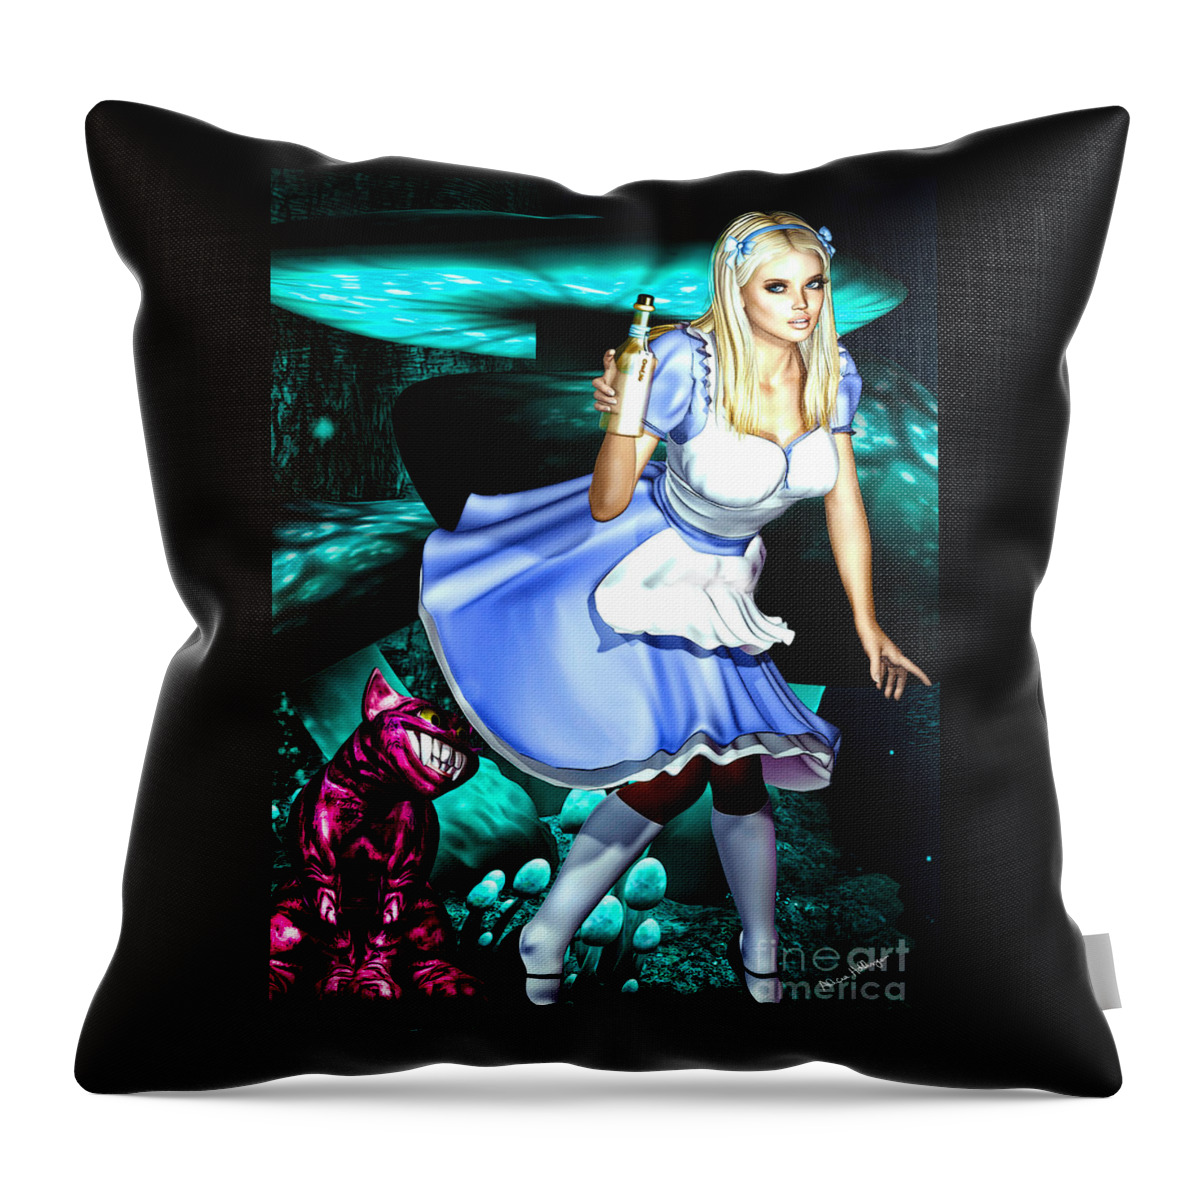 Alice In Wonderland Throw Pillow featuring the digital art Go Ask Alice by Alicia Hollinger